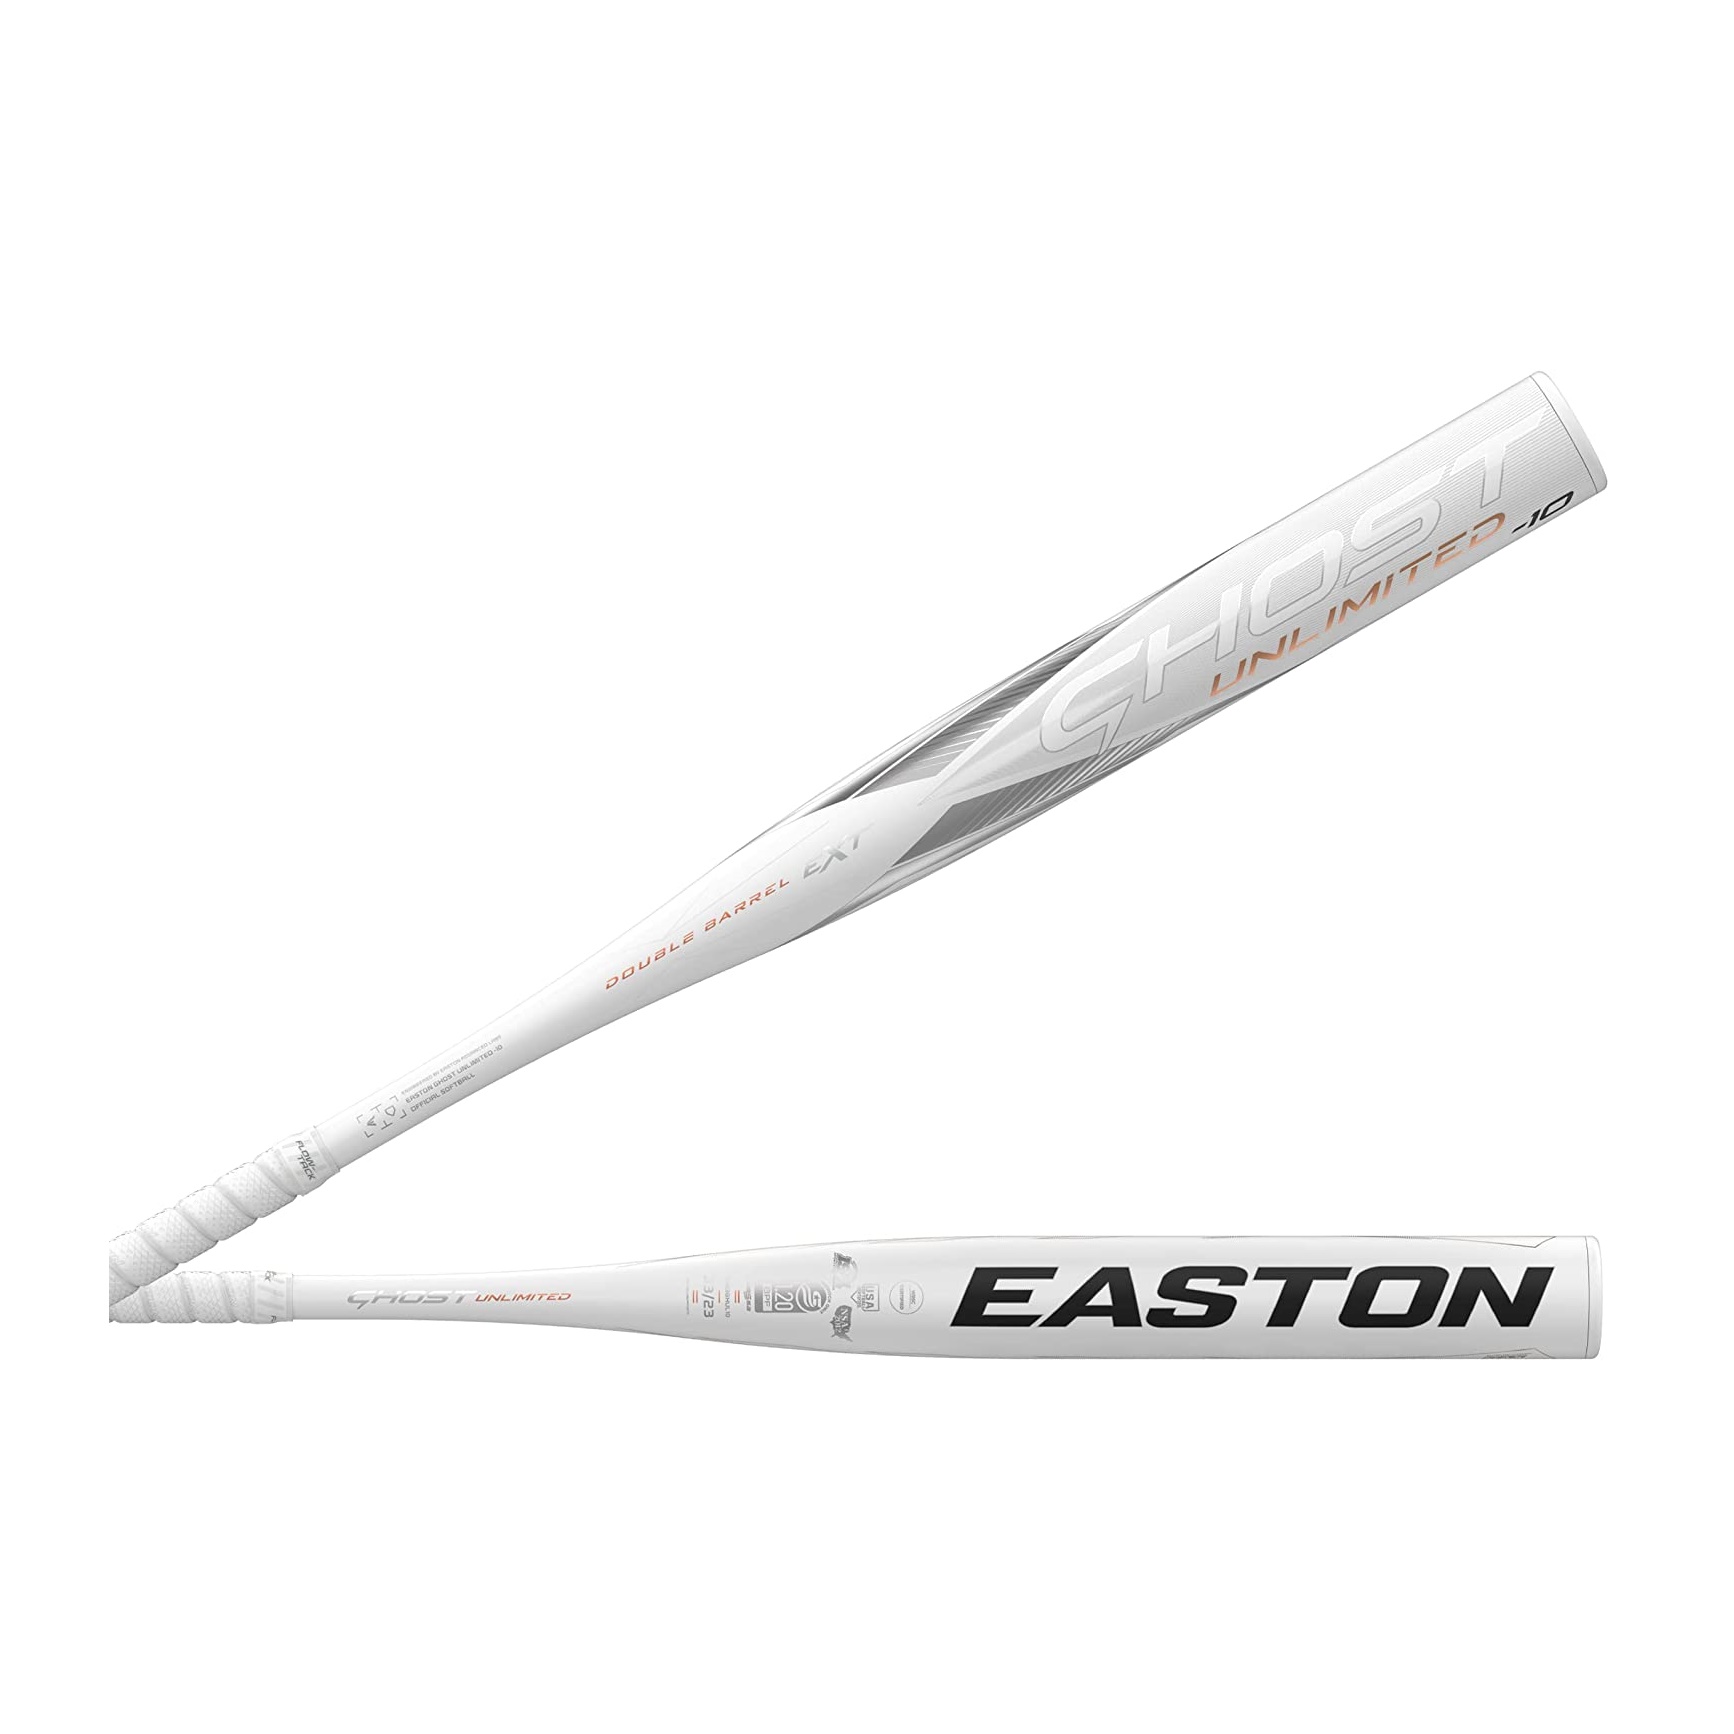 easton-ghost-unlimited-fp23ghul-11-fastpitch-softball-bat-30-inch-19-oz FP23GHUL11-3019 Easton 628412416082 Introducing the Easton Ghost Unlimited Fastpitch Softball Bat a true game-changer